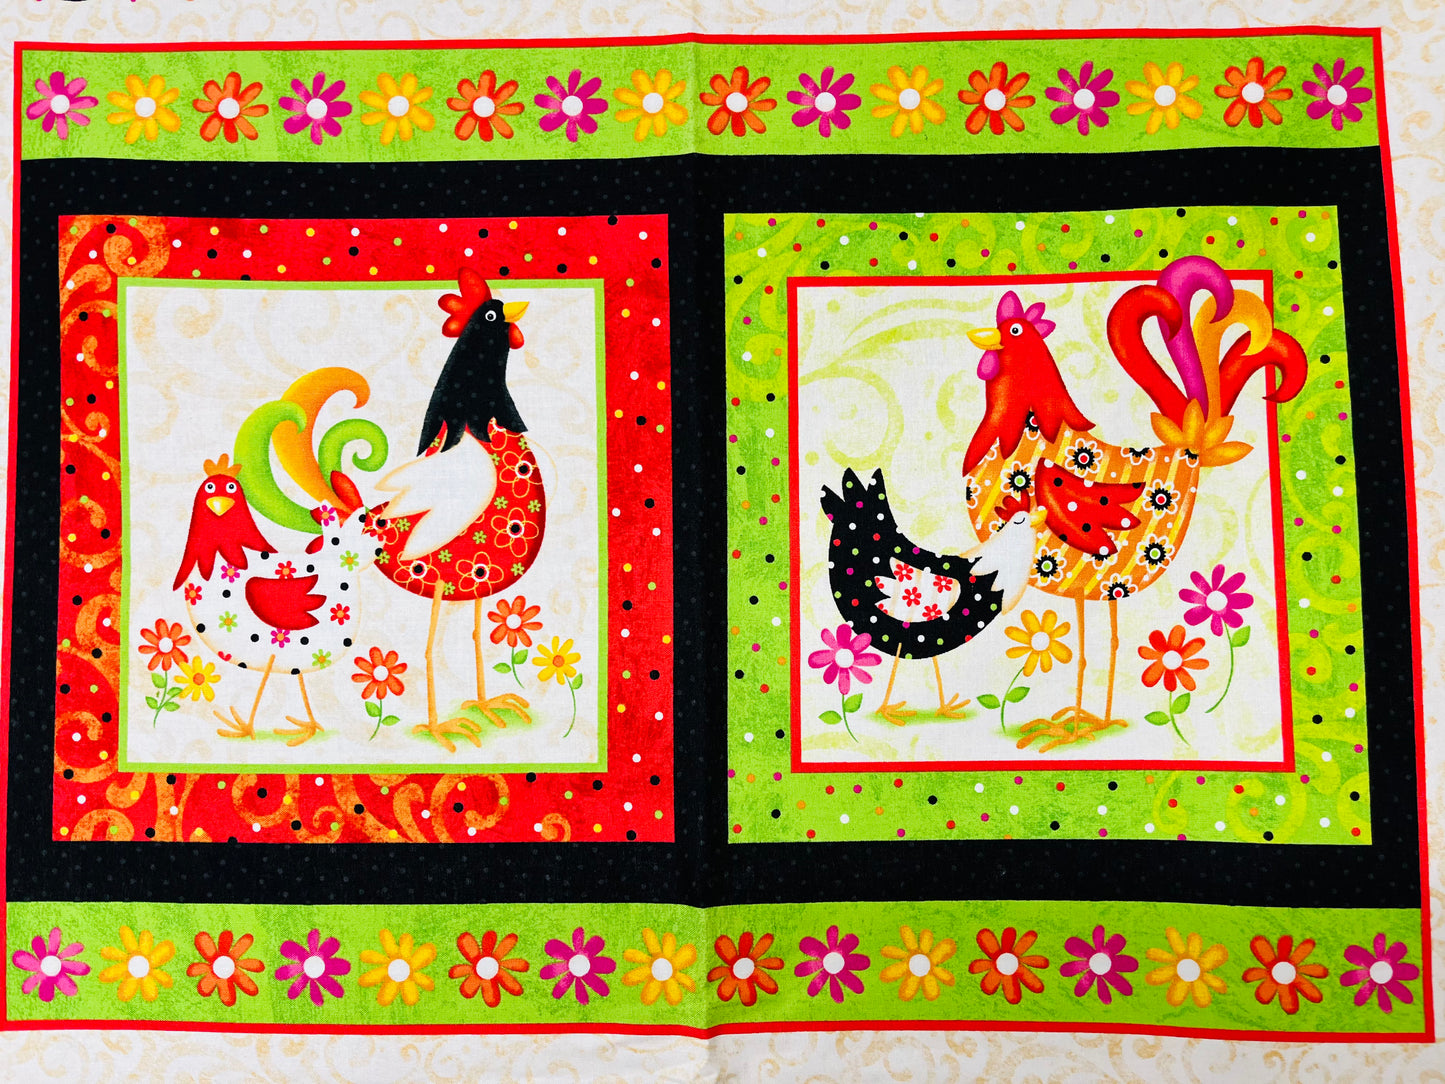 Chicken Roost Childs Cot / Quilt Fabric Panel